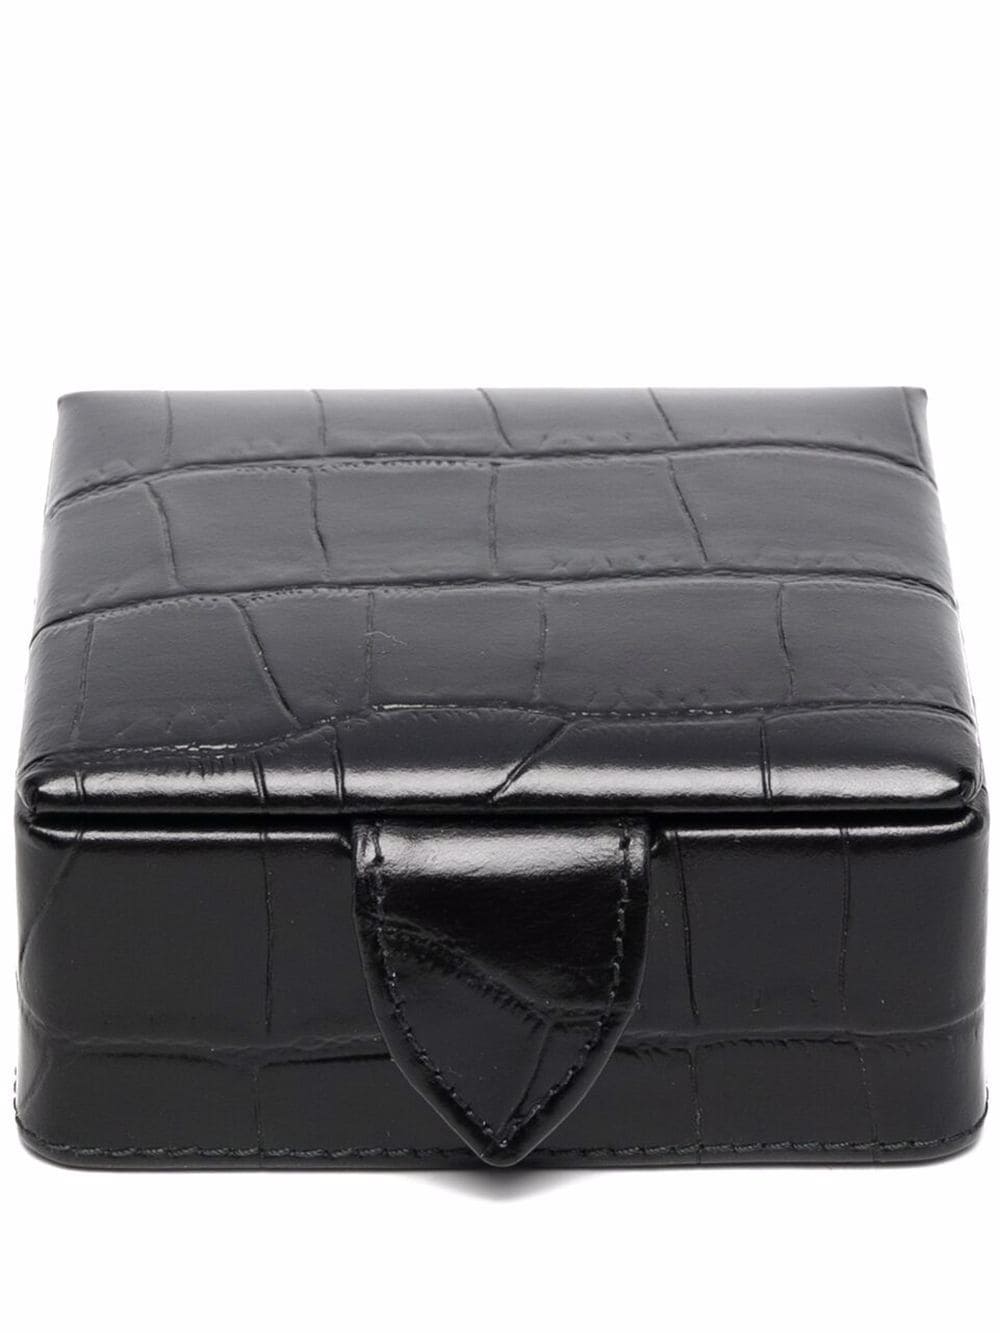 Aspinal Of London crocodile-effect leather box - Black von Aspinal Of London